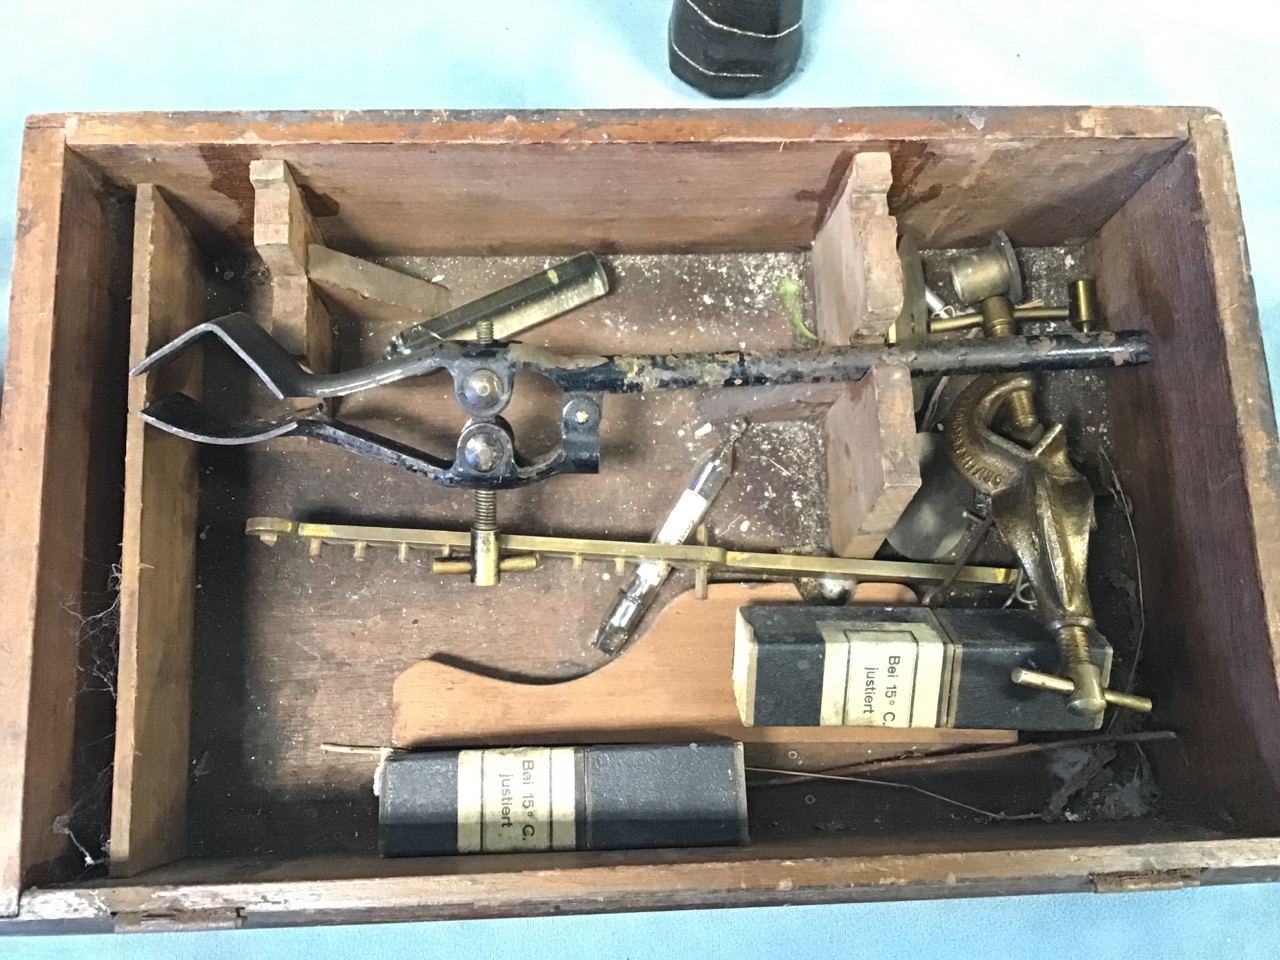 Miscellaneous collectors items - two wood tennis rackets with clamps, a pyramid telephone, a - Image 2 of 3